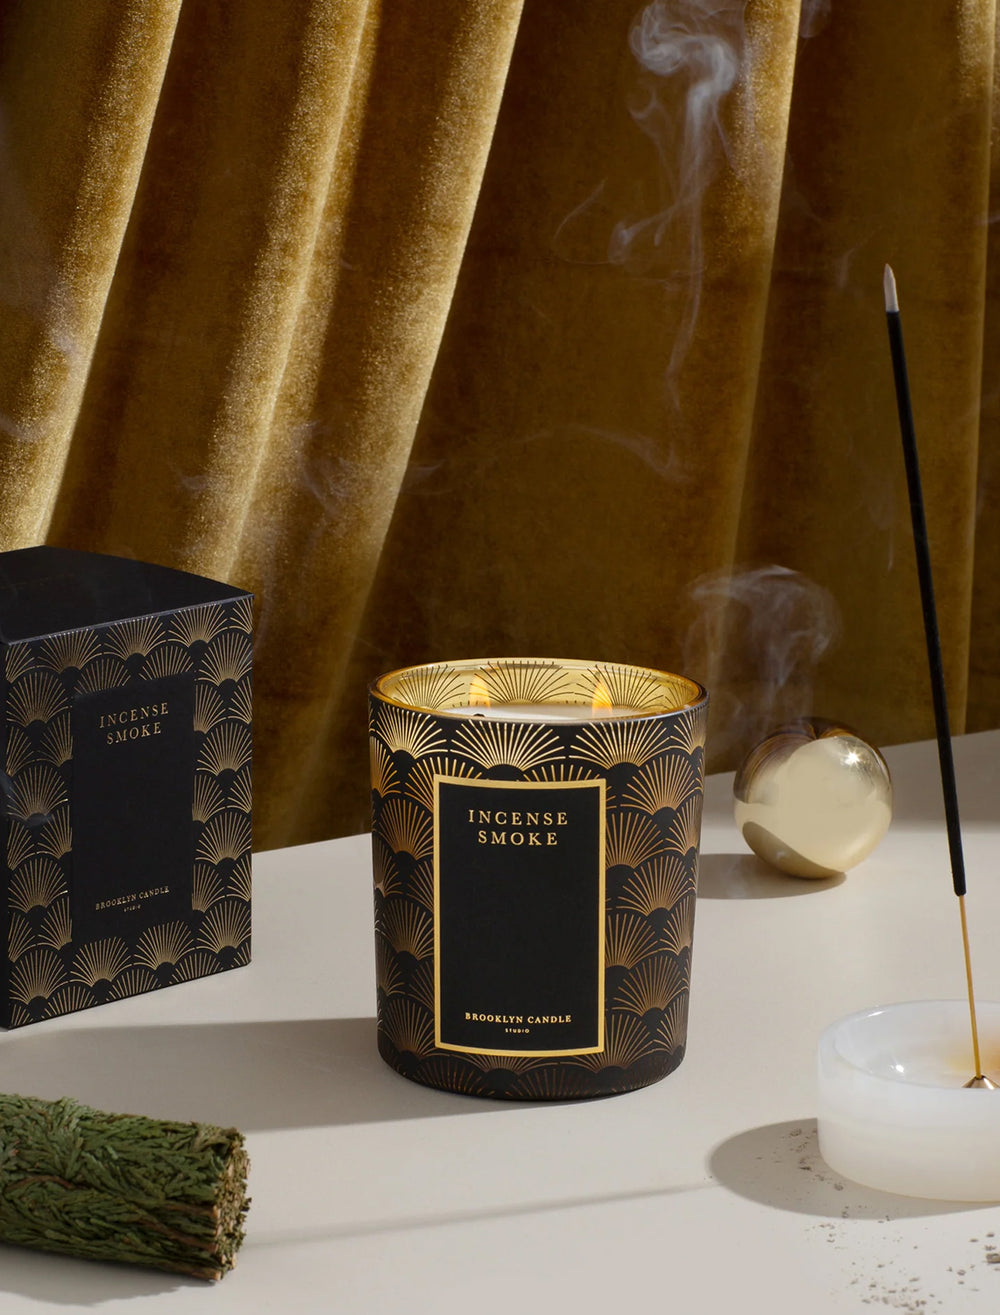 Brooklyn Candle Studio's incense smoke black tie holiday candle.